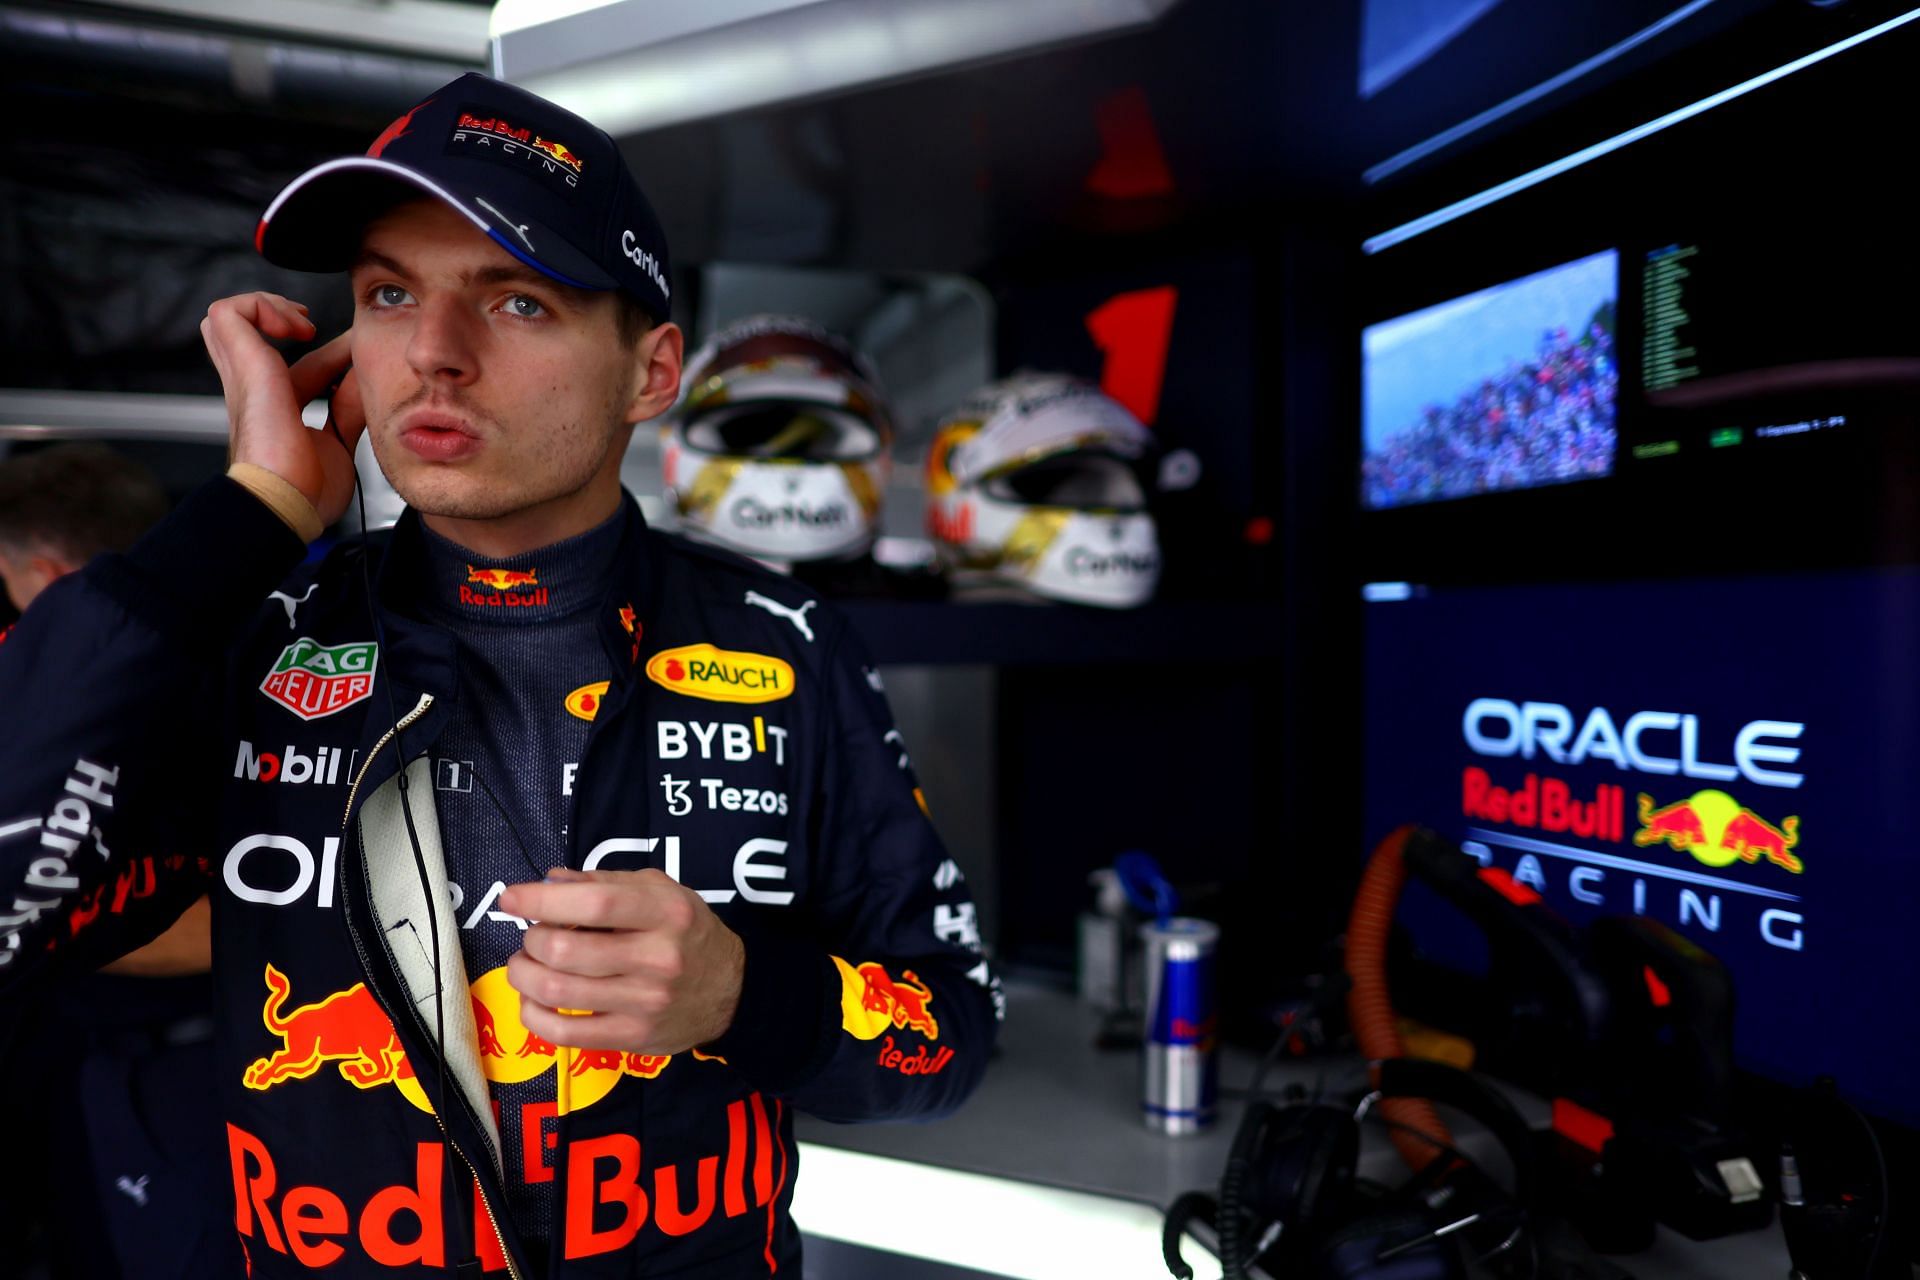 Max Verstappen prepares to drive in the garage during qualifying ahead of the F1 Grand Prix of France at Circuit Paul Ricard on July 23, 2022 in Le Castellet, France. (Photo by Mark Thompson/Getty Images)